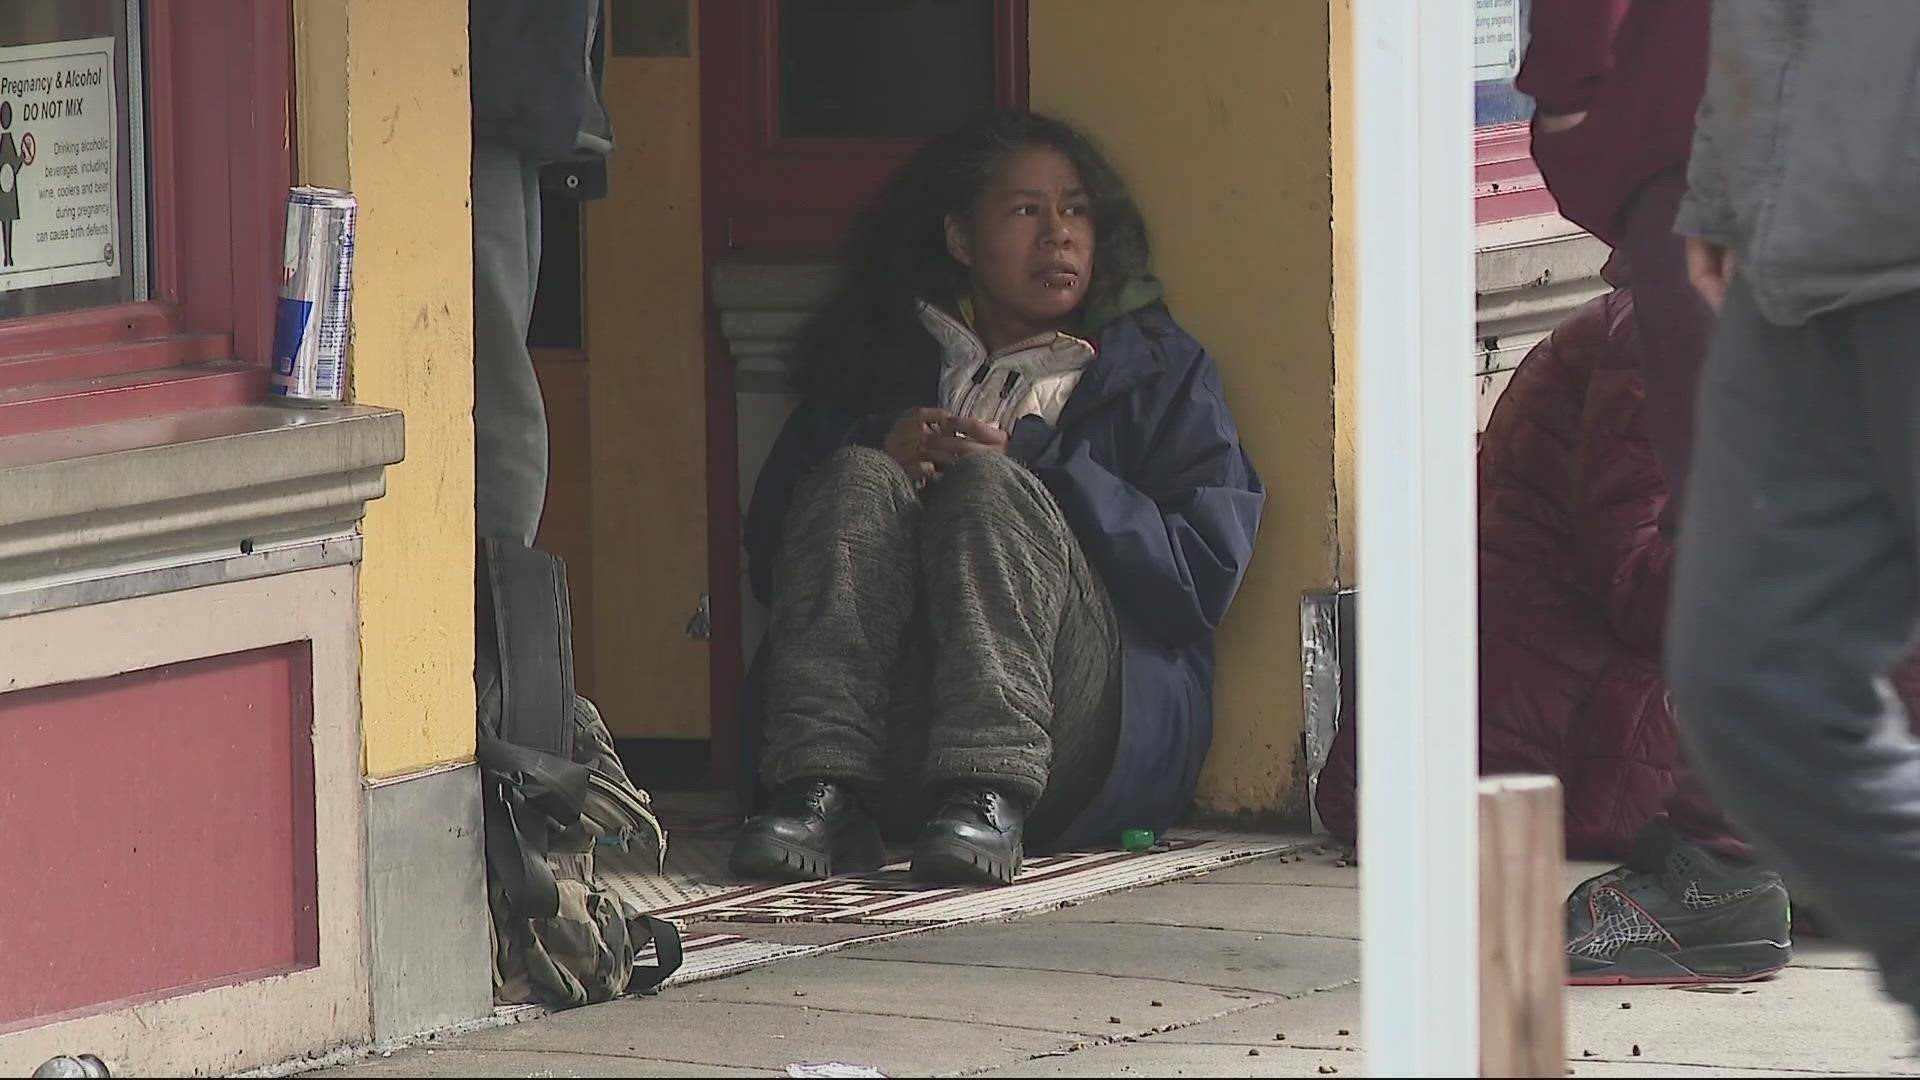 A proposed Oregon bill would give monthly payments for two years to people living on the streets or those at risk of being homeless, if they qualify.